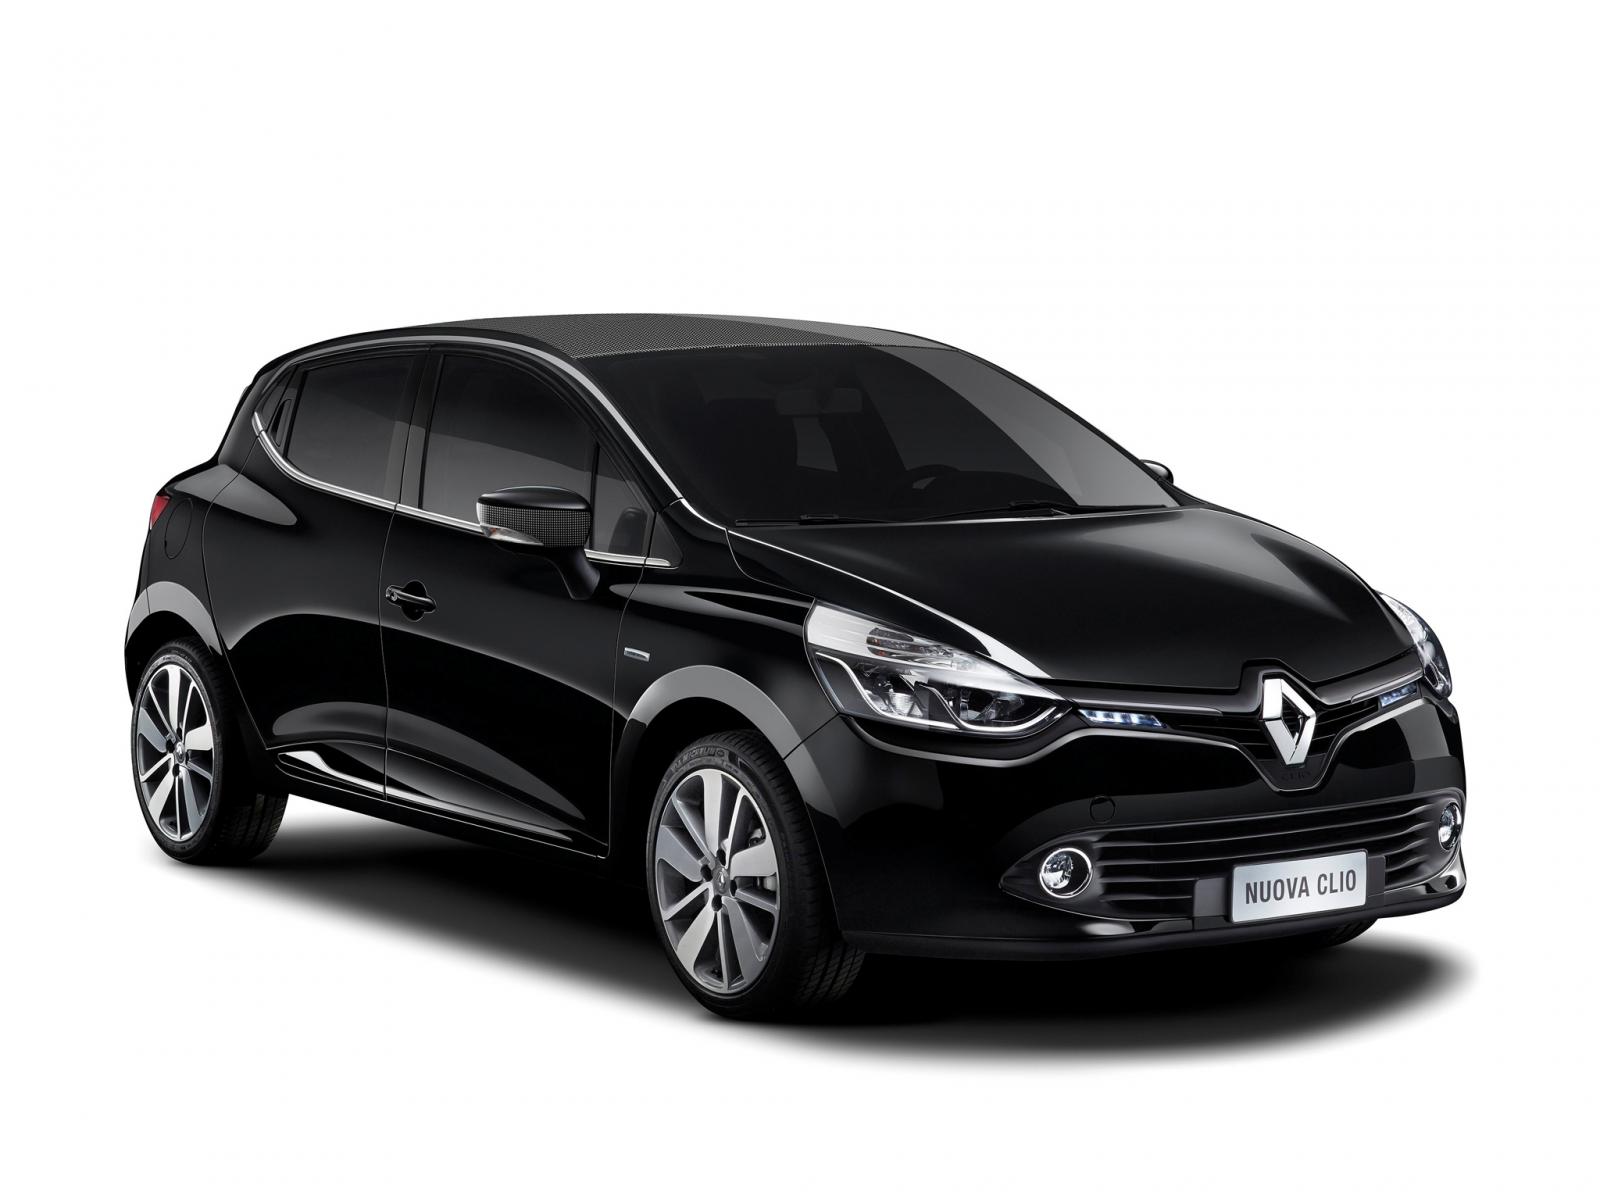 Renault Clio Costume National Limited Edition